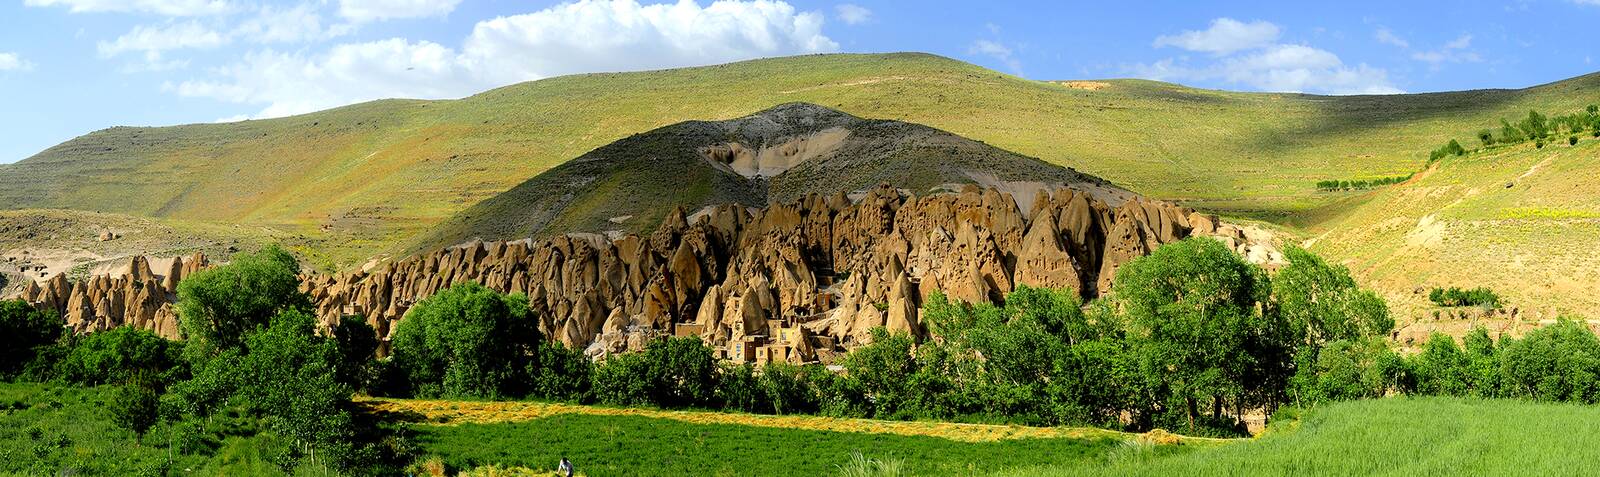 Kandovan village from outside